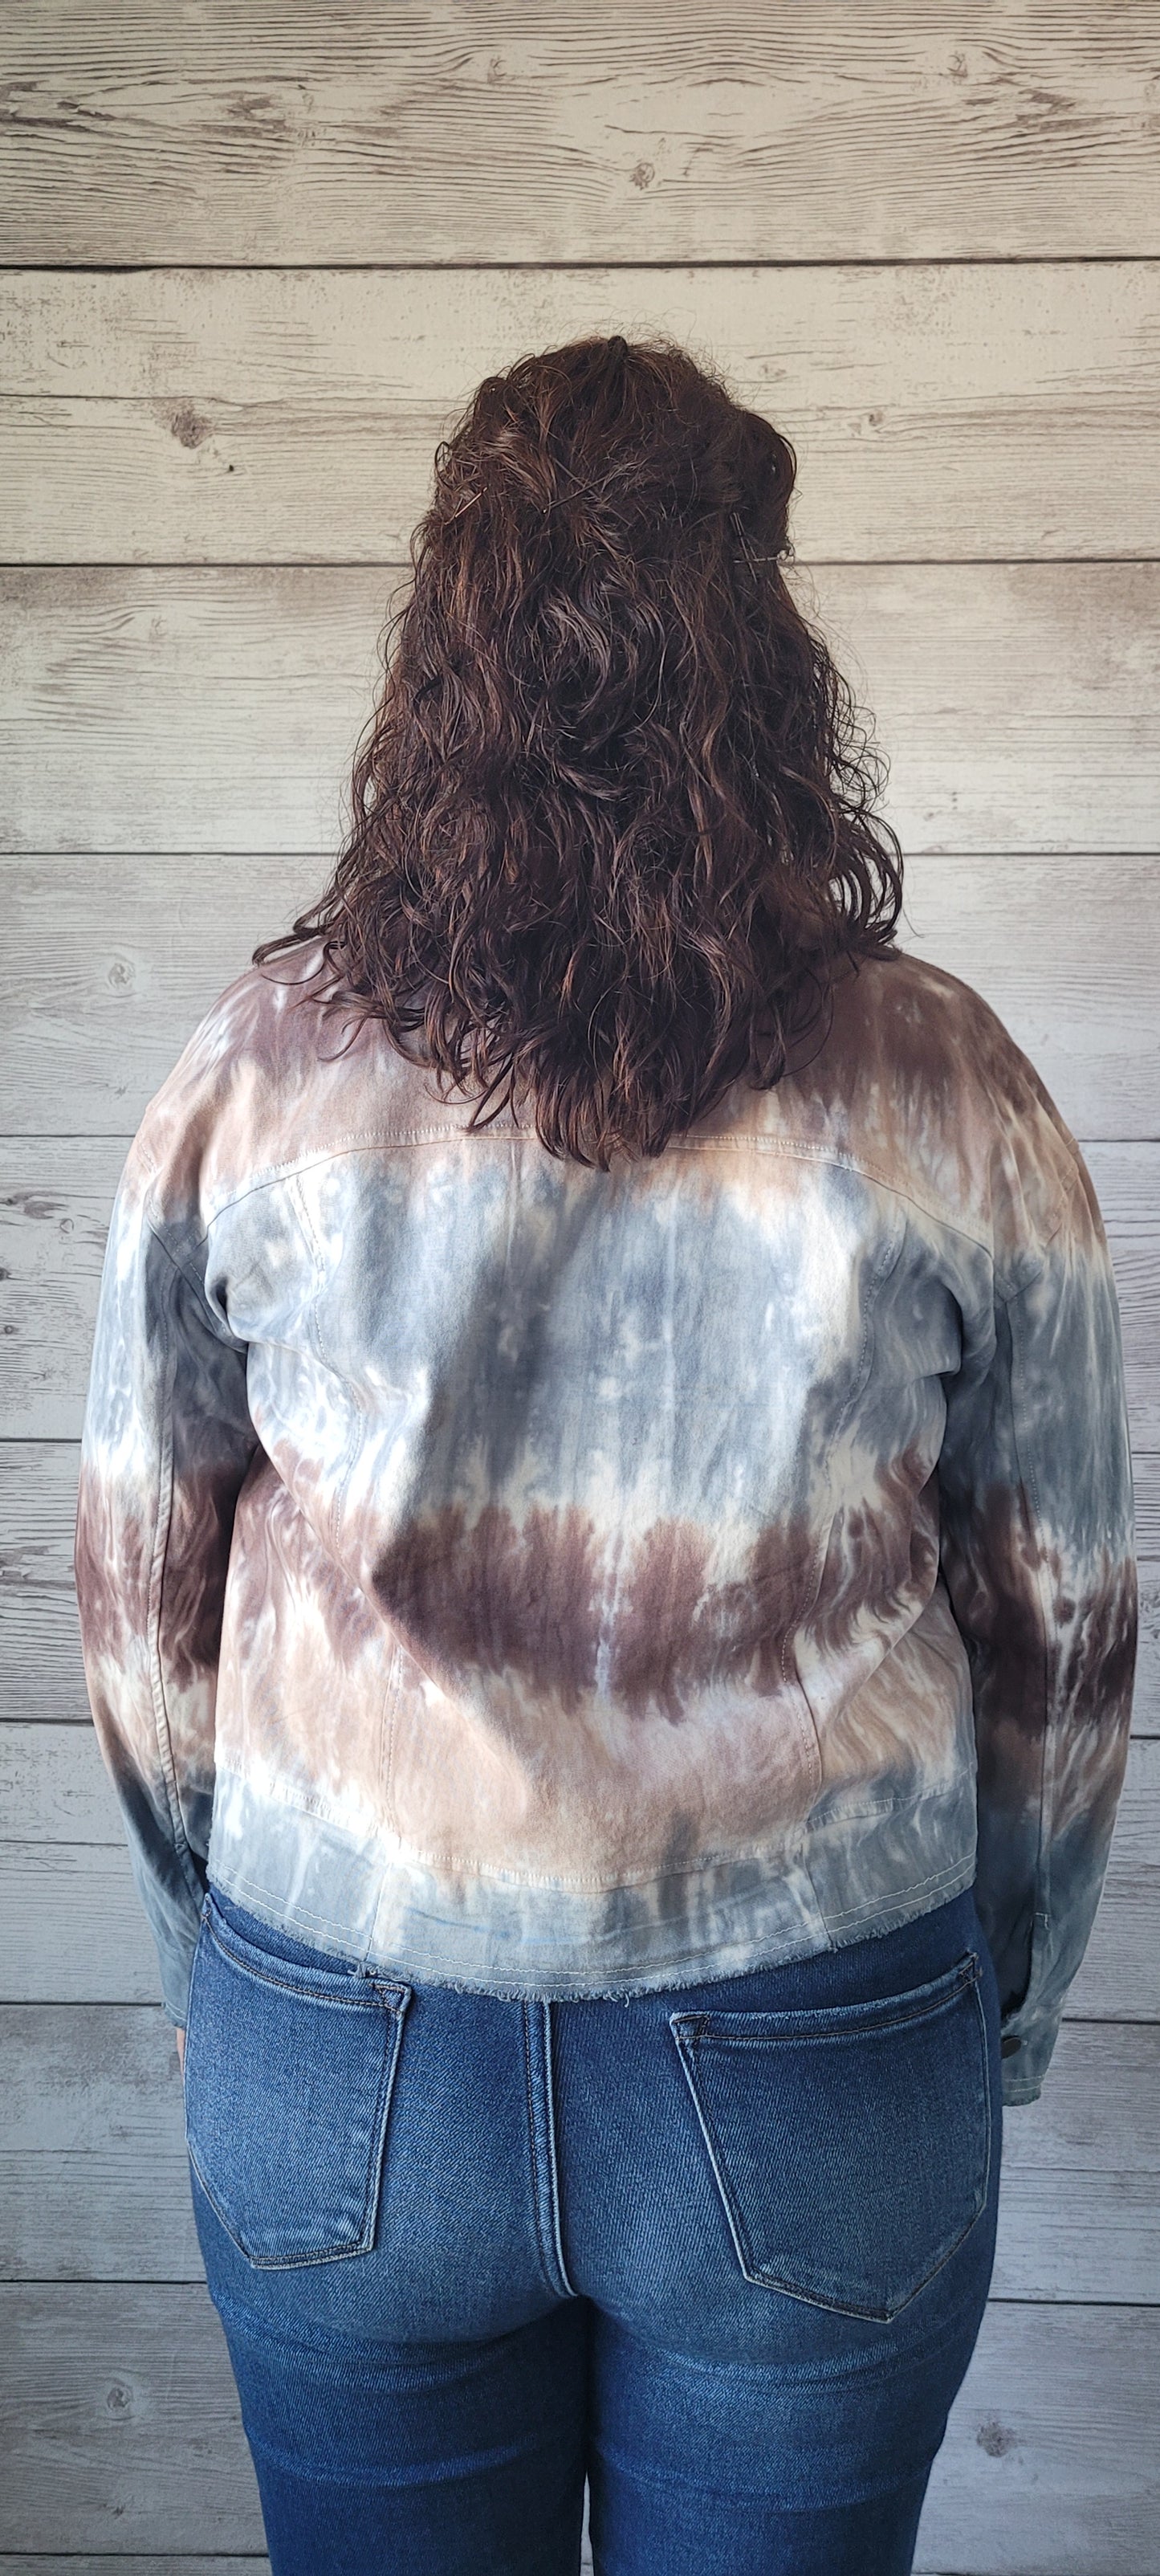 Make a statement with this adorable blue & brown tie dye trucker jacket! Enjoy the unique style of this timeless piece featuring metal button closure, bust flap pockets, and distressed hem and cuff edges. Wearing this piece is sure to cause a stir; try it and let the compliments roll in! Sizes small through large.